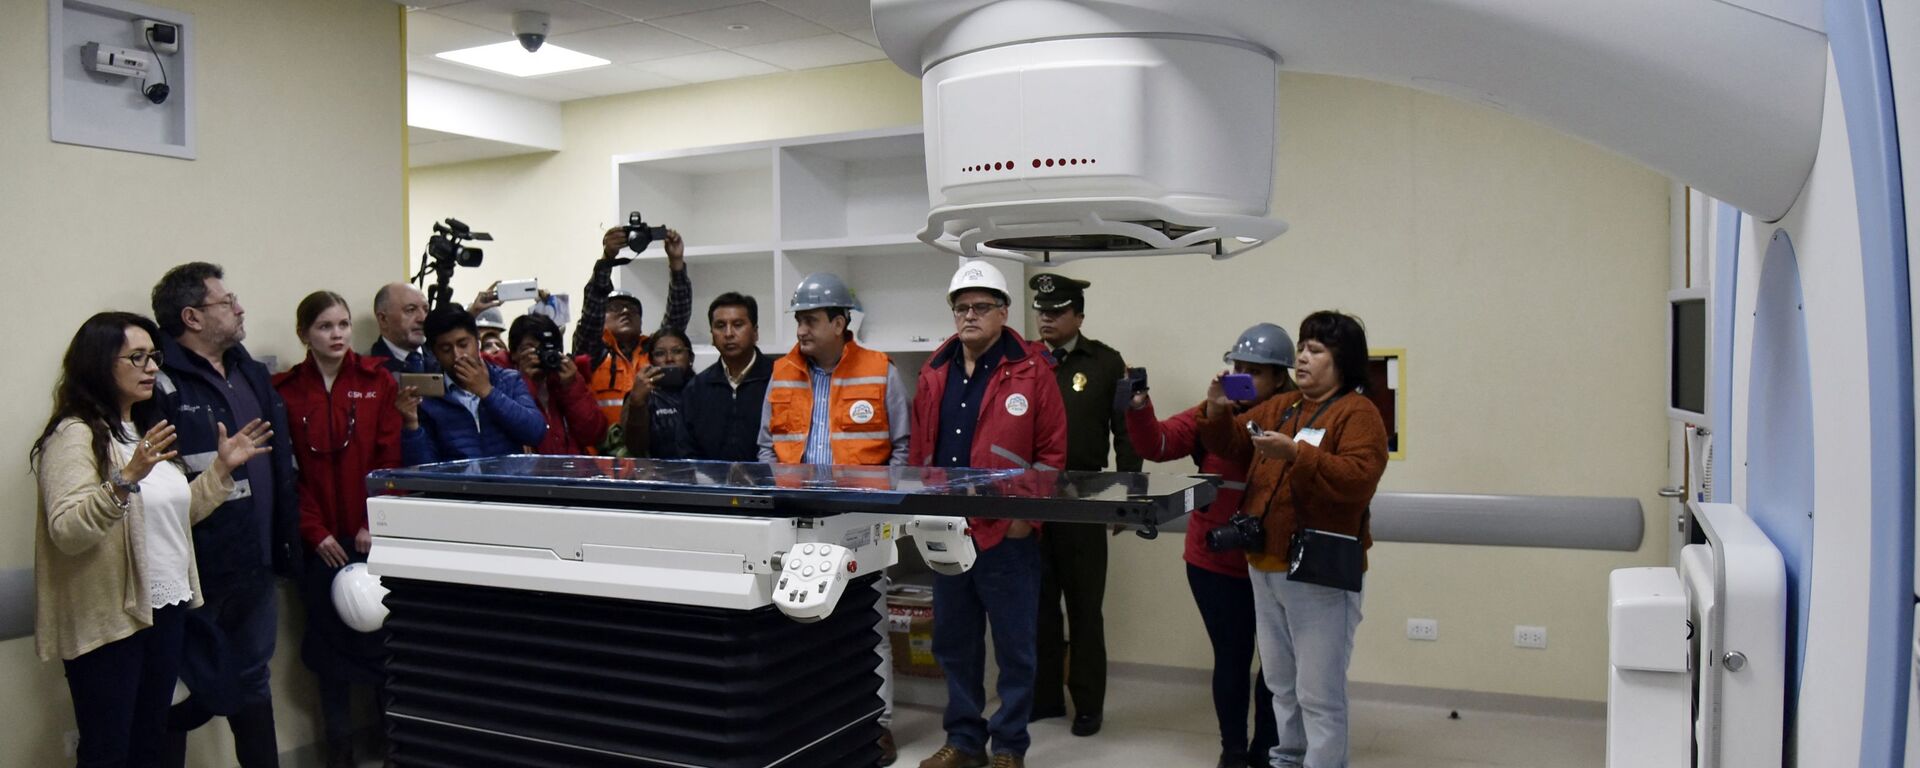 The director of Nuclear Technology, Dr Vivian Rada (L) shows a medical linear accelerator (LINAC) -used for cancer treatments- to Bolivian government authorities during a visit to the Investigation Centre of Nuclear Medicine, in El Alto, Bolivia, on March 10, 2020. - Russian company Rosatom is building the first nuclear research center for medical and agricultural purposes in the Bolivian city of El Alto, which costs 351 million dollars - Sputnik International, 1920, 10.06.2021